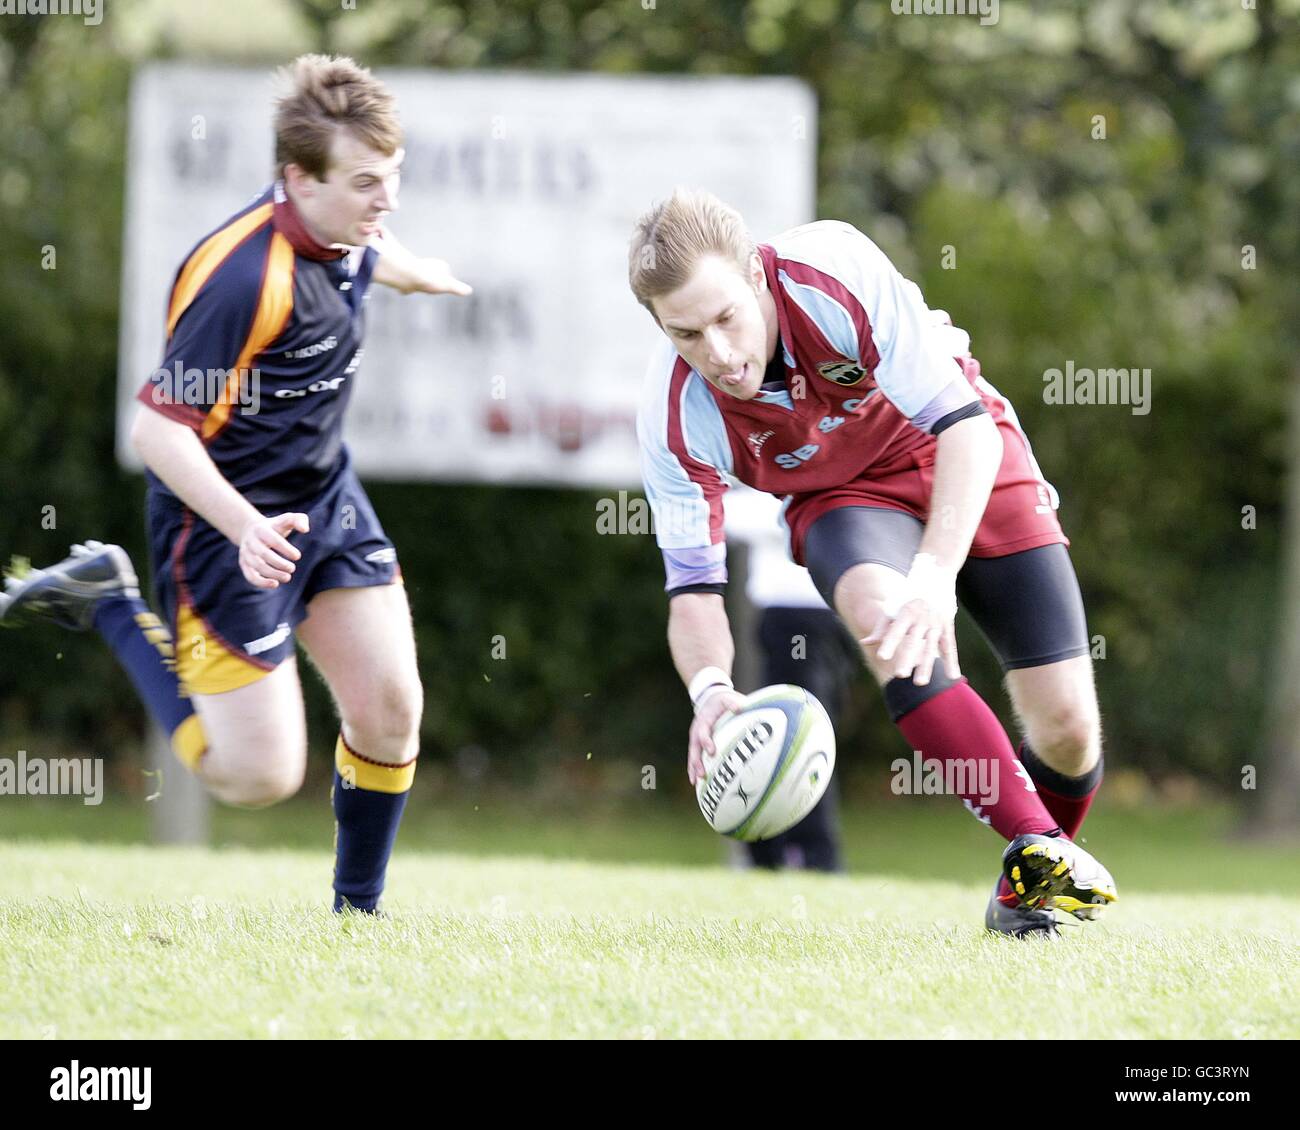 St Boswells' Paul Scott scores a try in the Scottish Hydro East 2 match at St Boswells, Melrose. Stock Photo